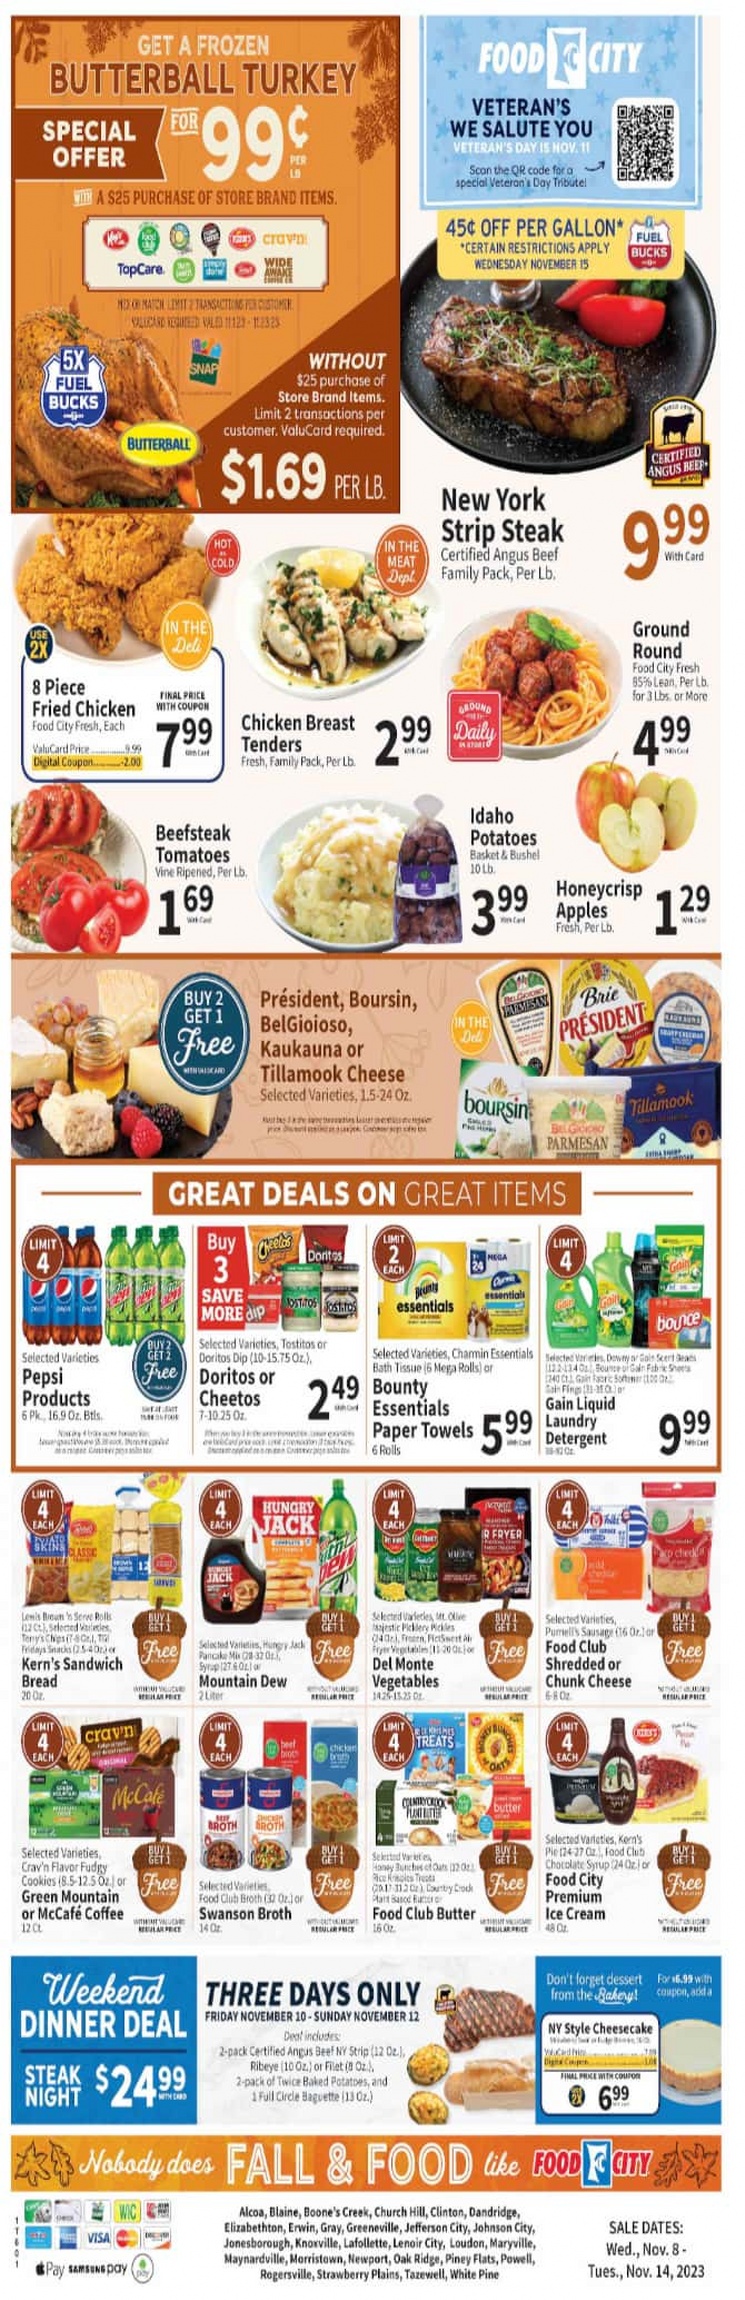 Food City Black Friday June 2024 Weekly Sales, Deals, Discounts and Digital Coupons.